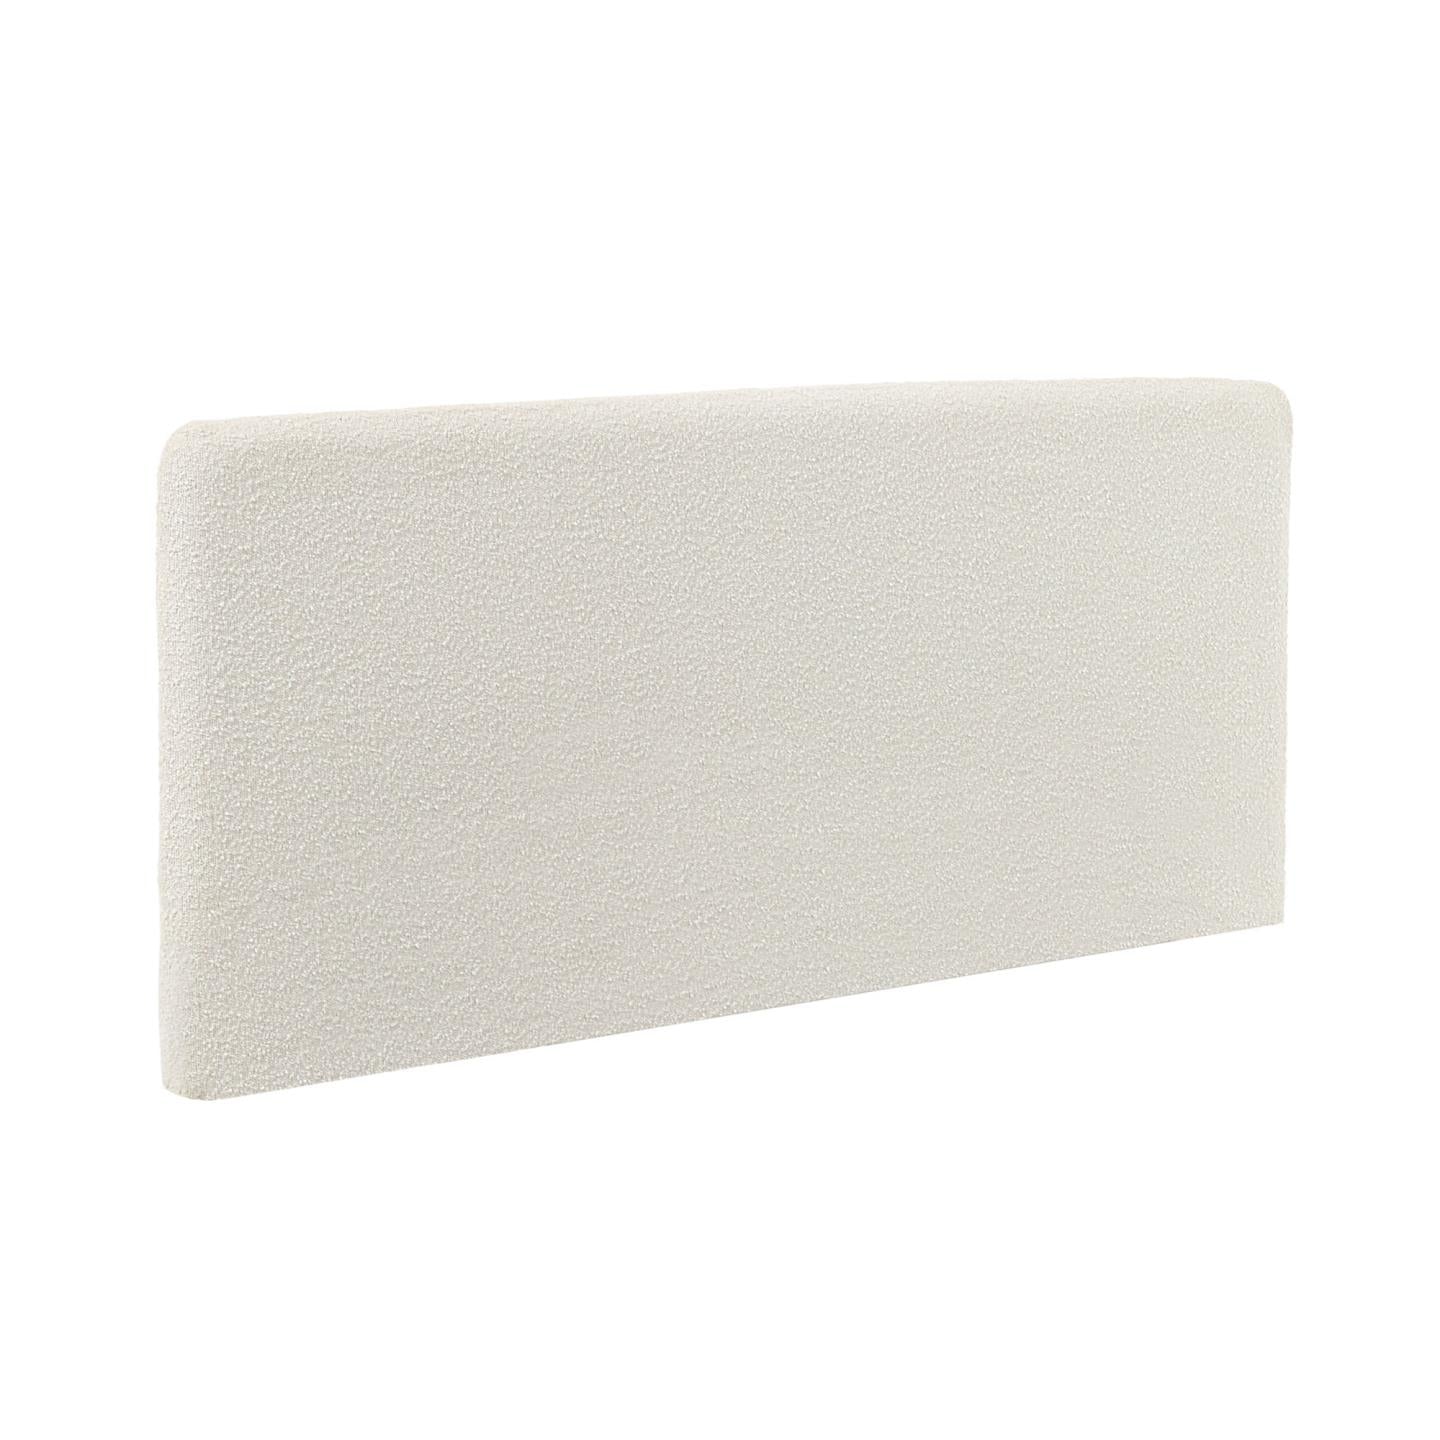 Dyla headboard with removable cover in white fleece, for 160 cm beds